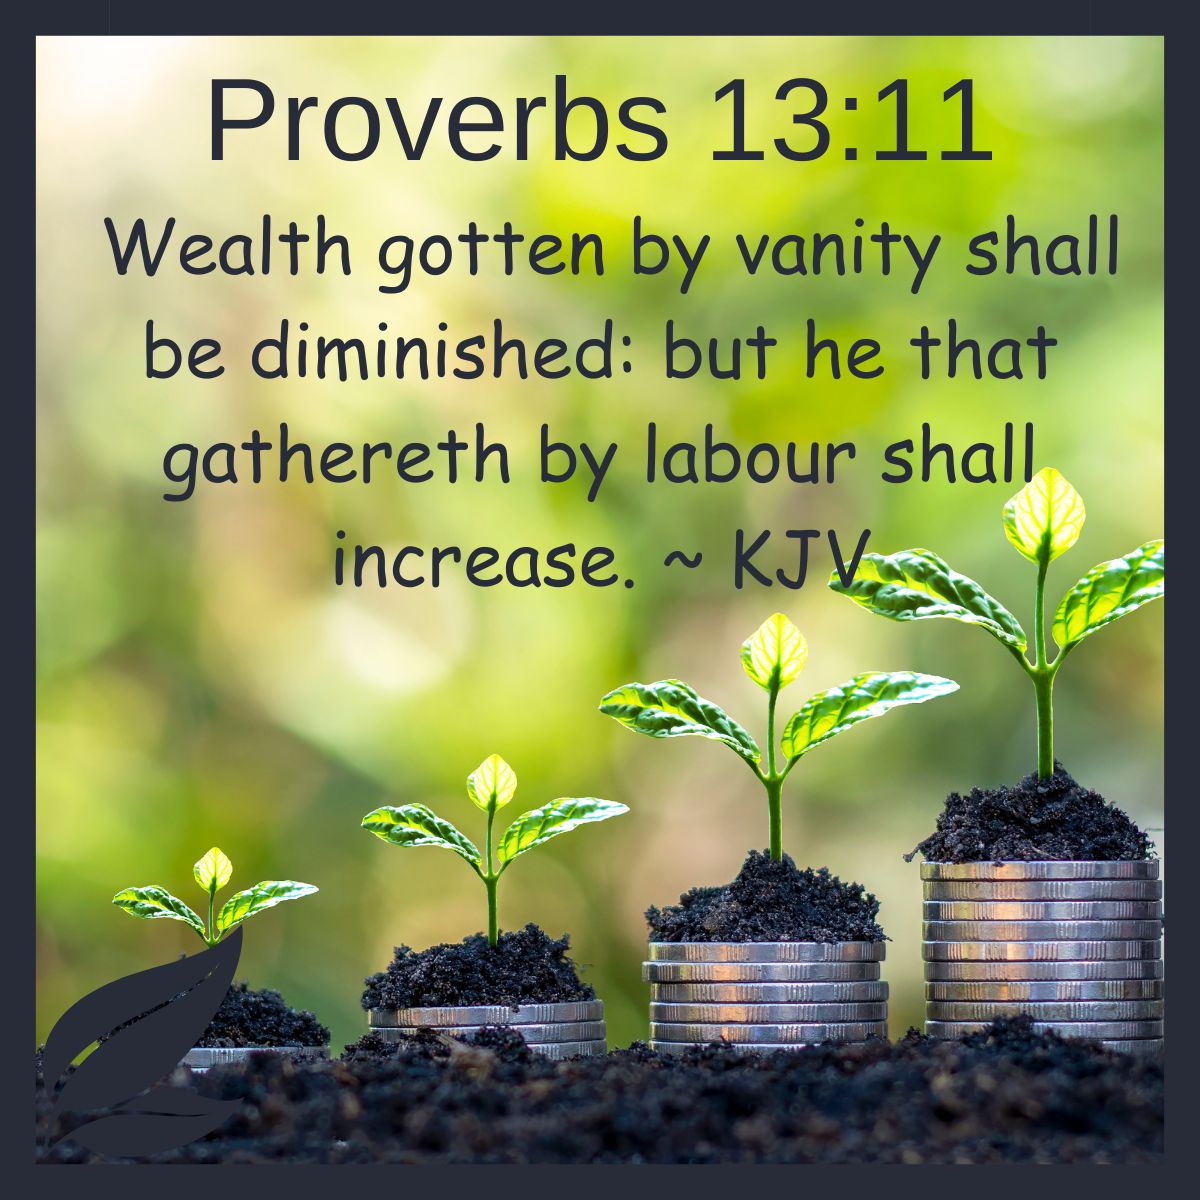 Wealth gotten by vanity shall be diminished: but he that gathereth by labour shall increase. Proverbs 13:11